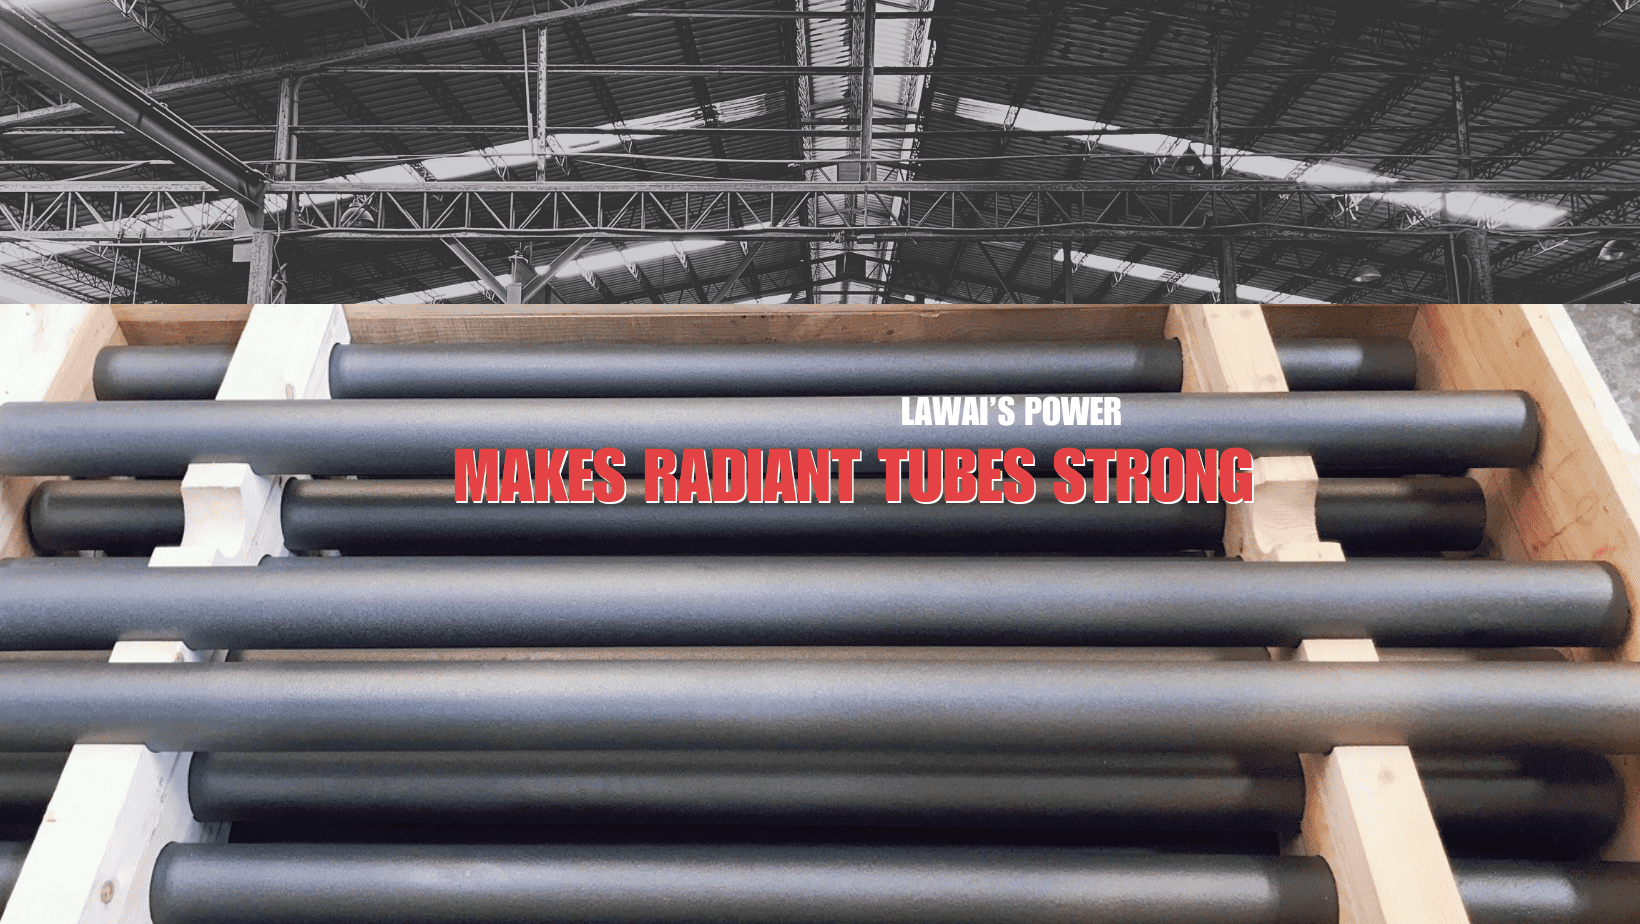 The high quality radiant tubes that are produced by centrifugal casting and out of China are produced at LAWAI INDUSTRIAL CORPORATION